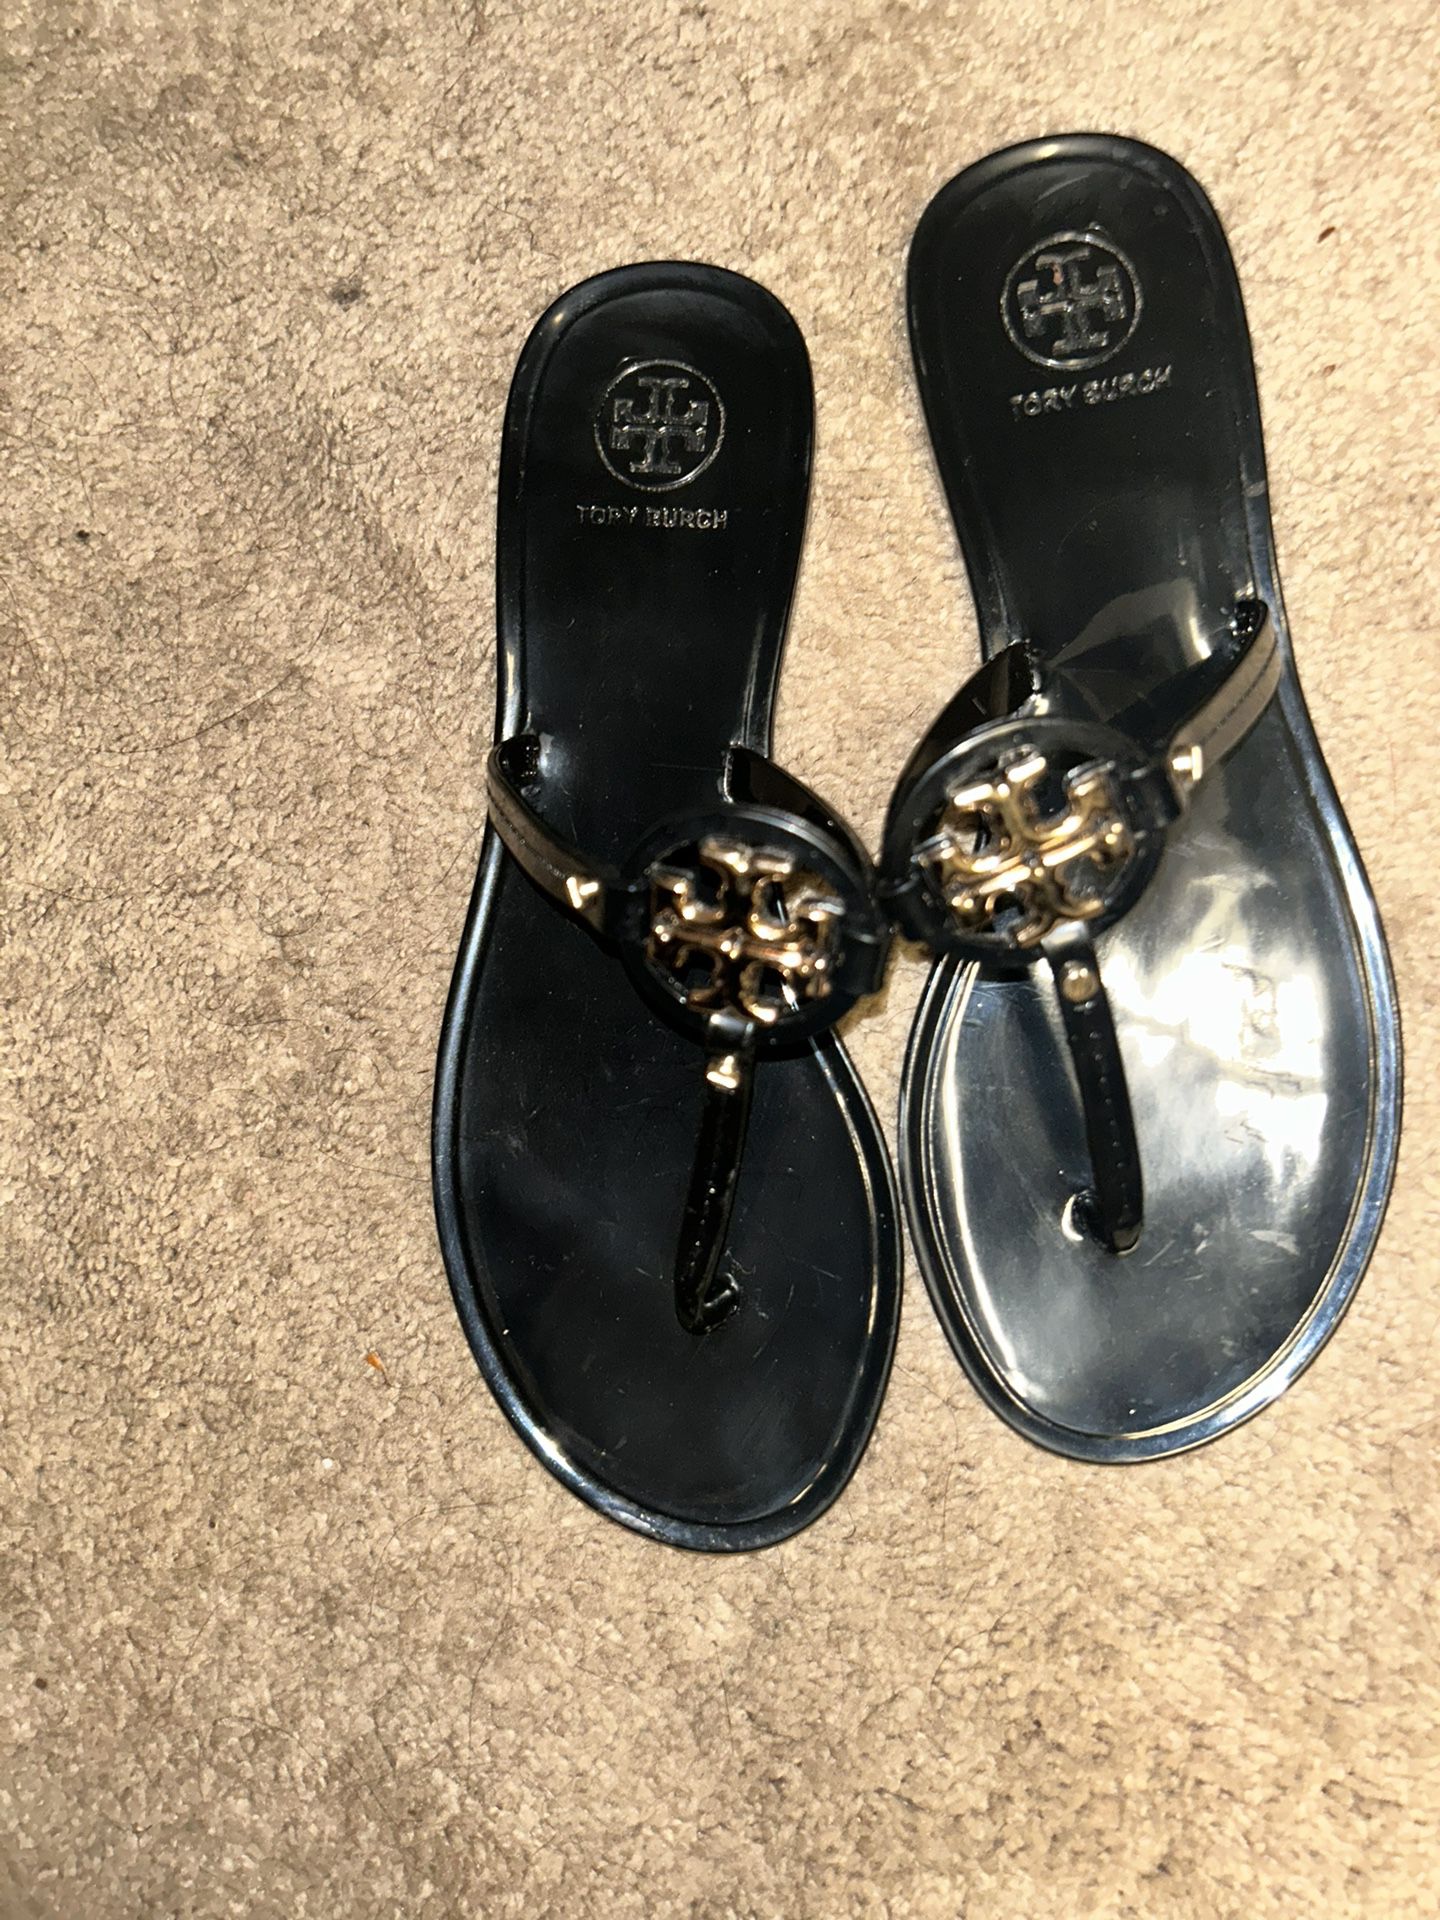 Tory Burch Slides for Sale in Tampa, FL - OfferUp